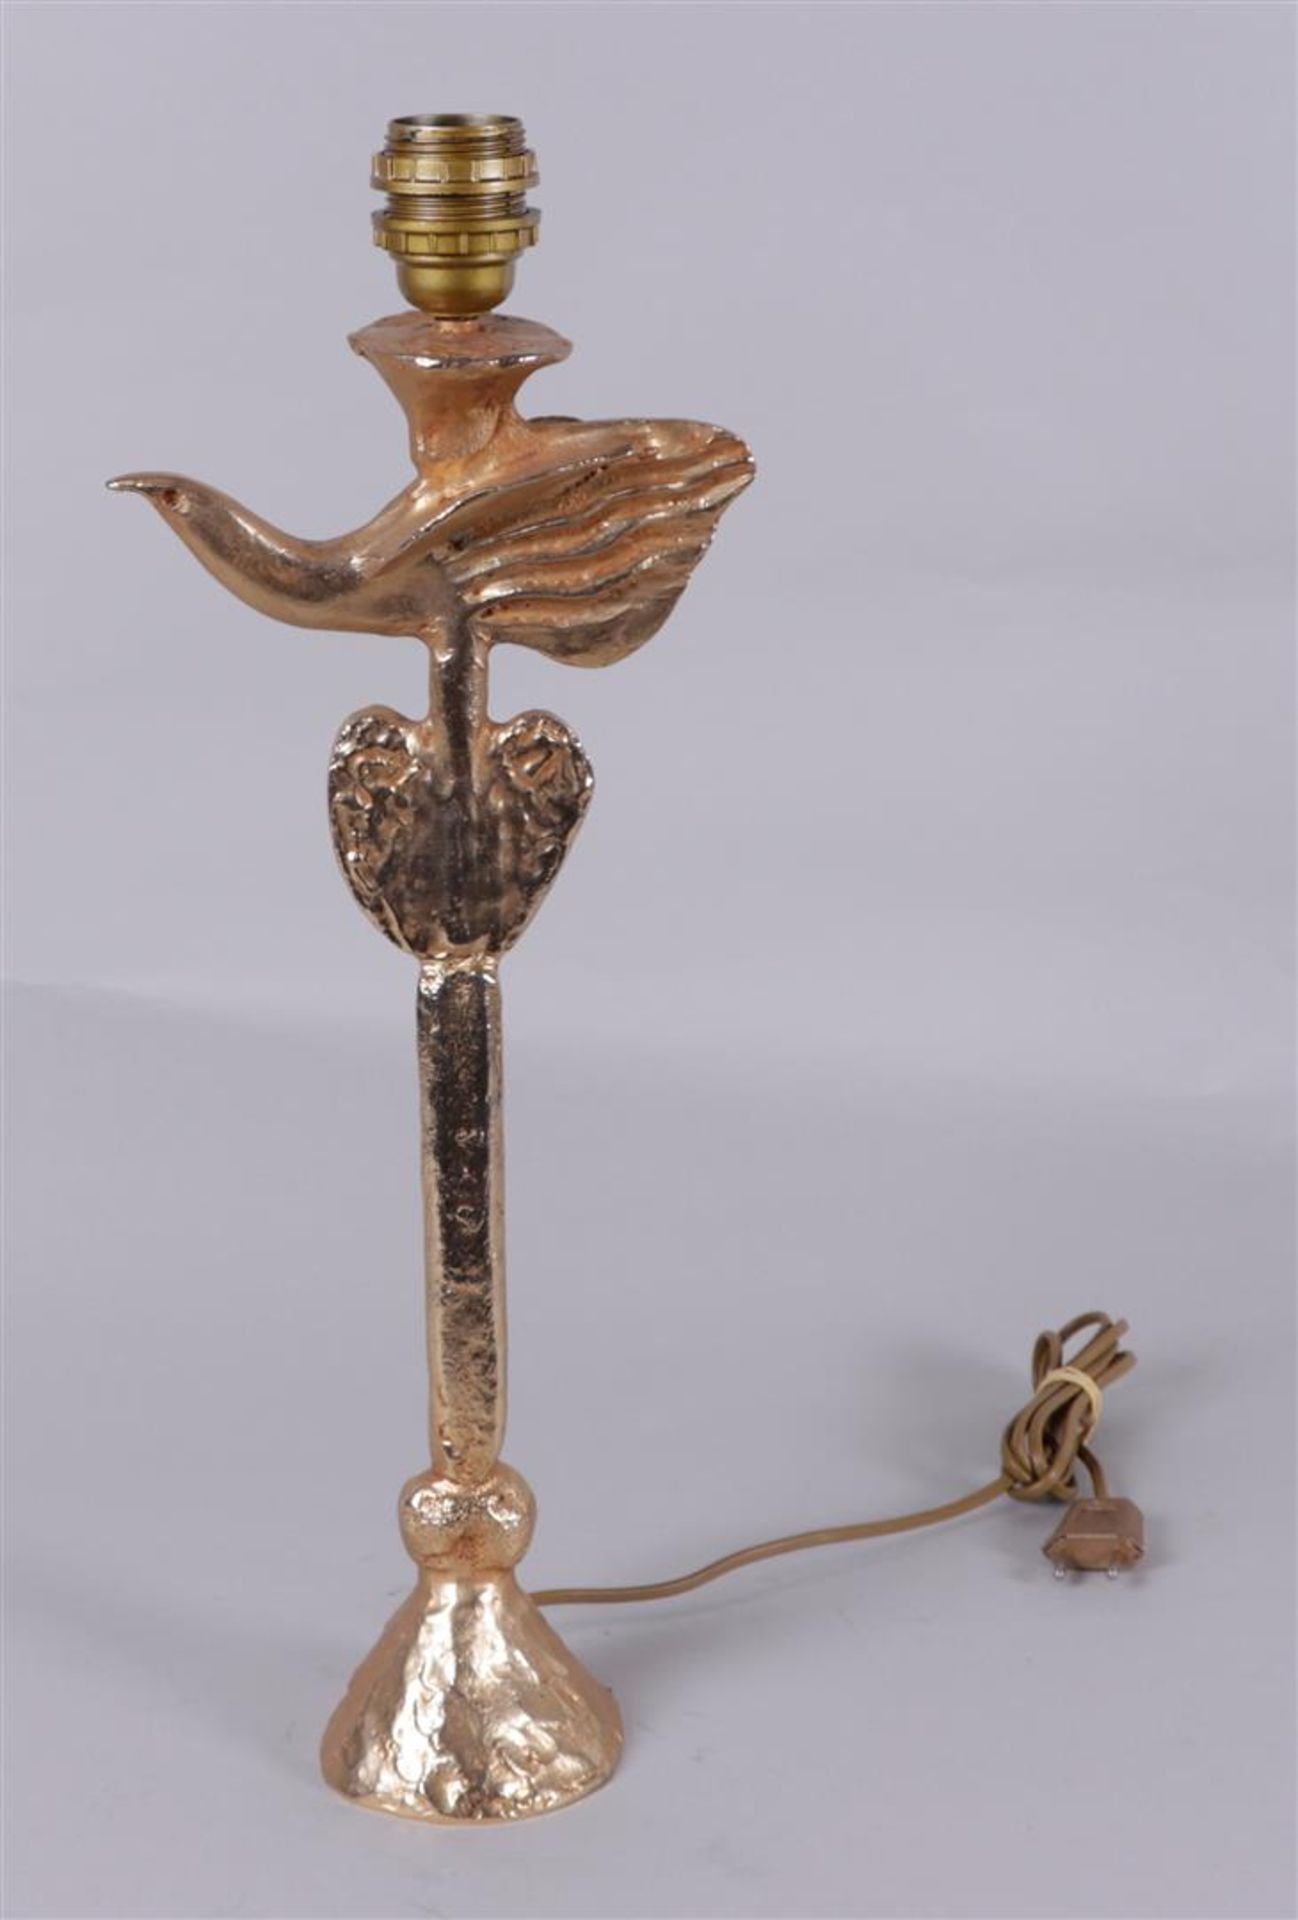 Pierre Casenove for Fondica, 'bird' gold-plated lamp. Signed on the base.
H. 45 cm.